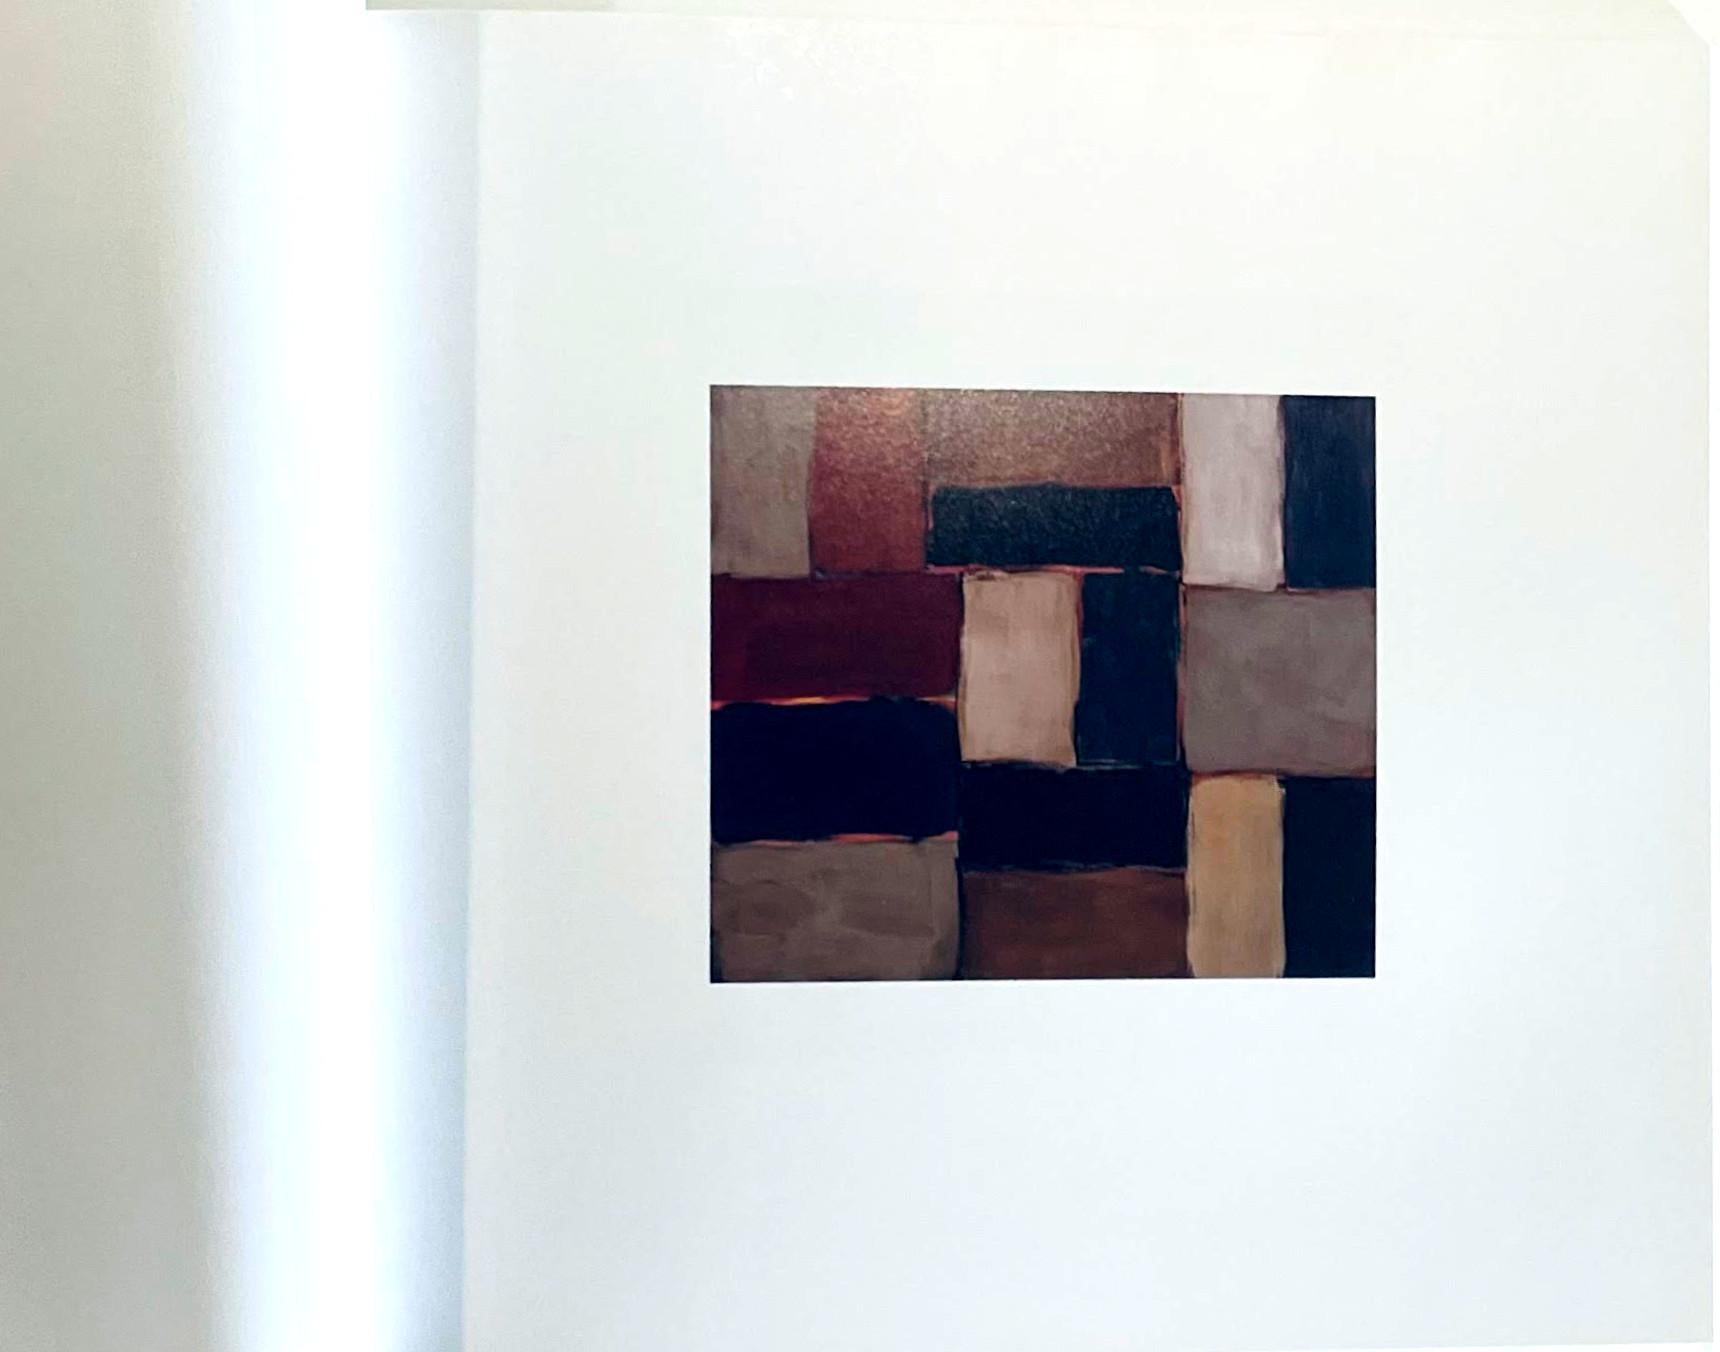 Different Places, Hardback monograph (Hand signed and inscribed by Sean Scully) For Sale 9